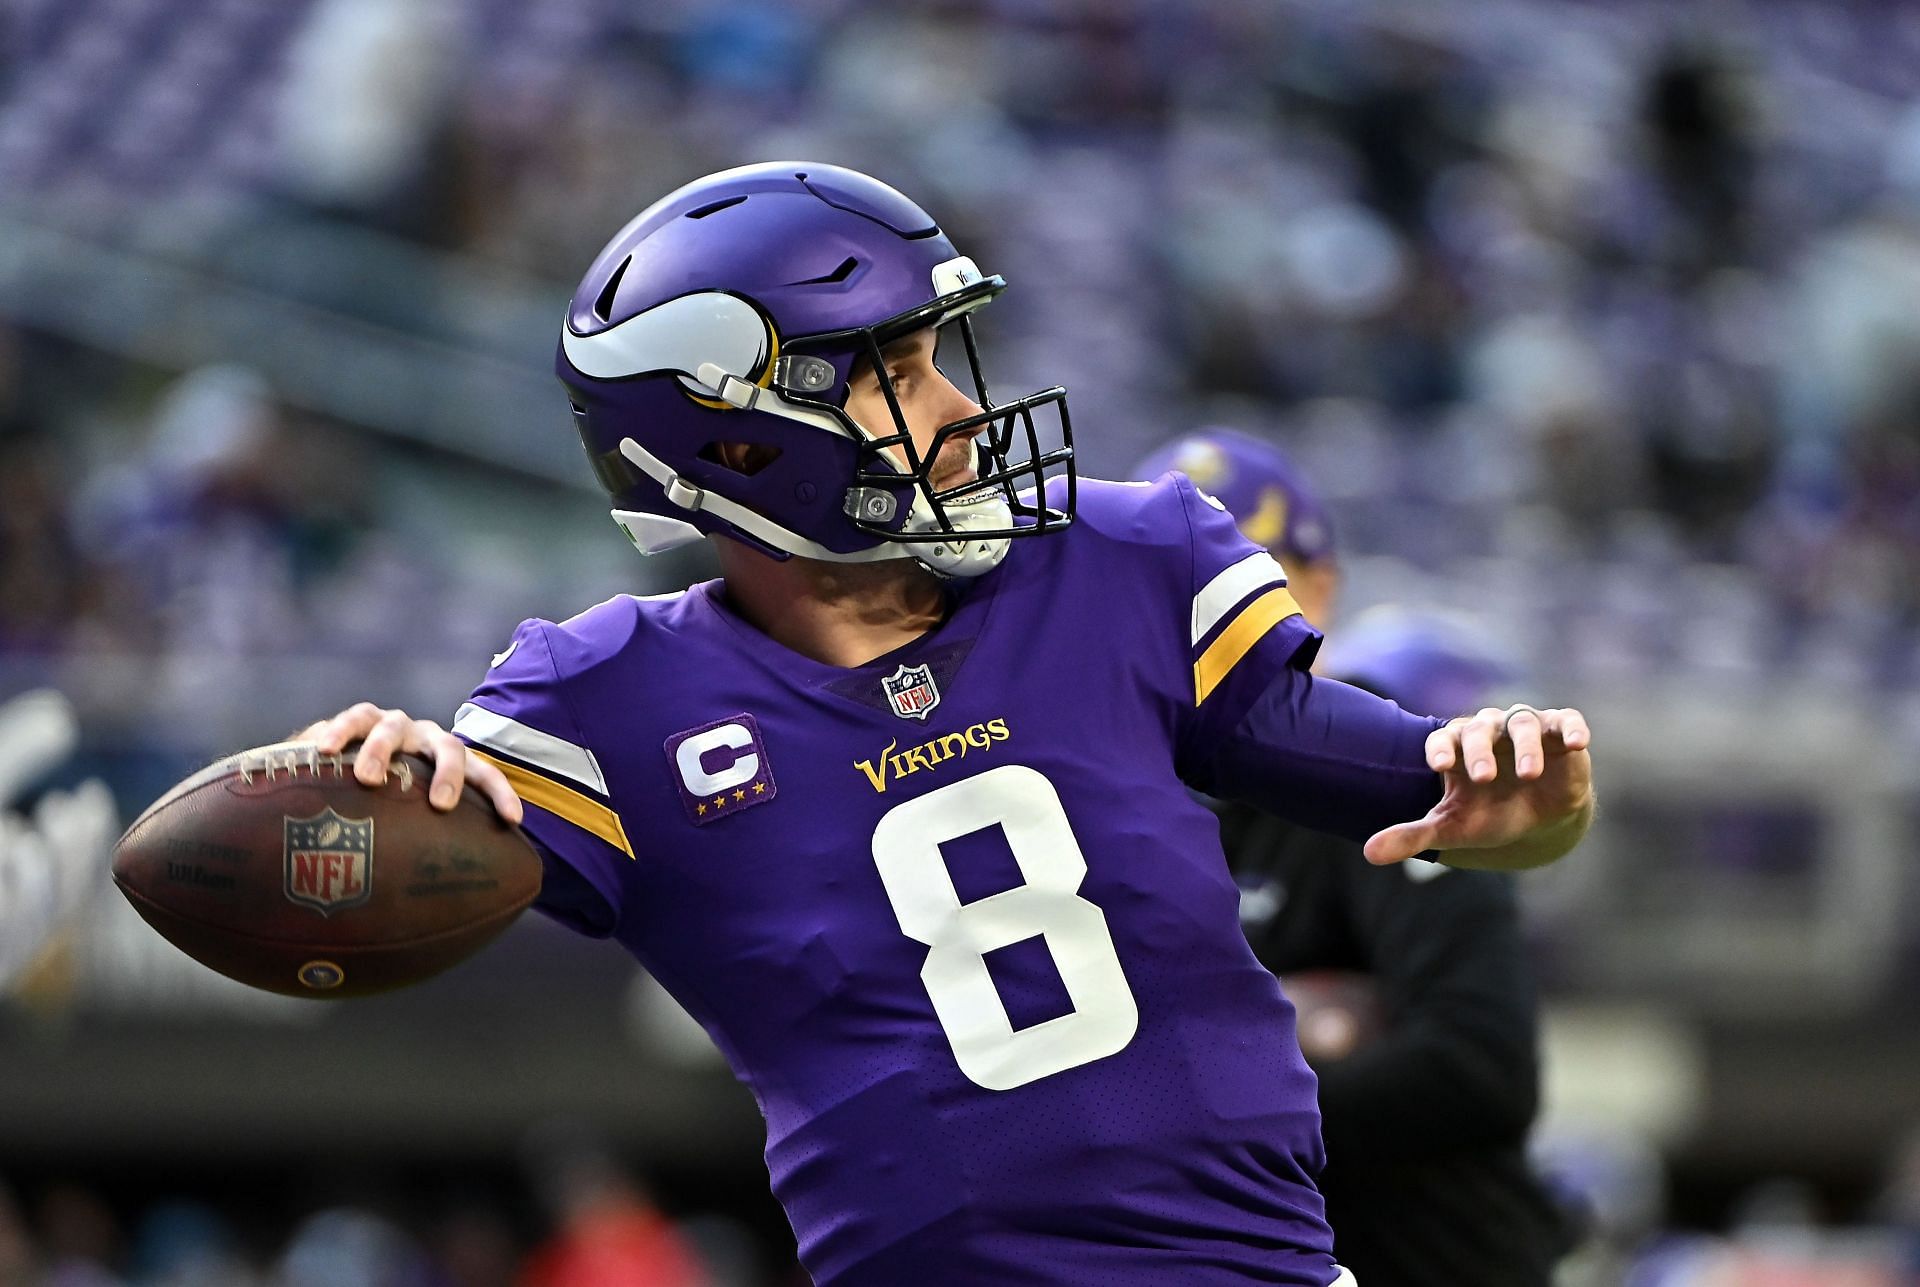 Minnesota Vikings quarteback Kirk Cousins has the stats but the team needs more to make the playoffs